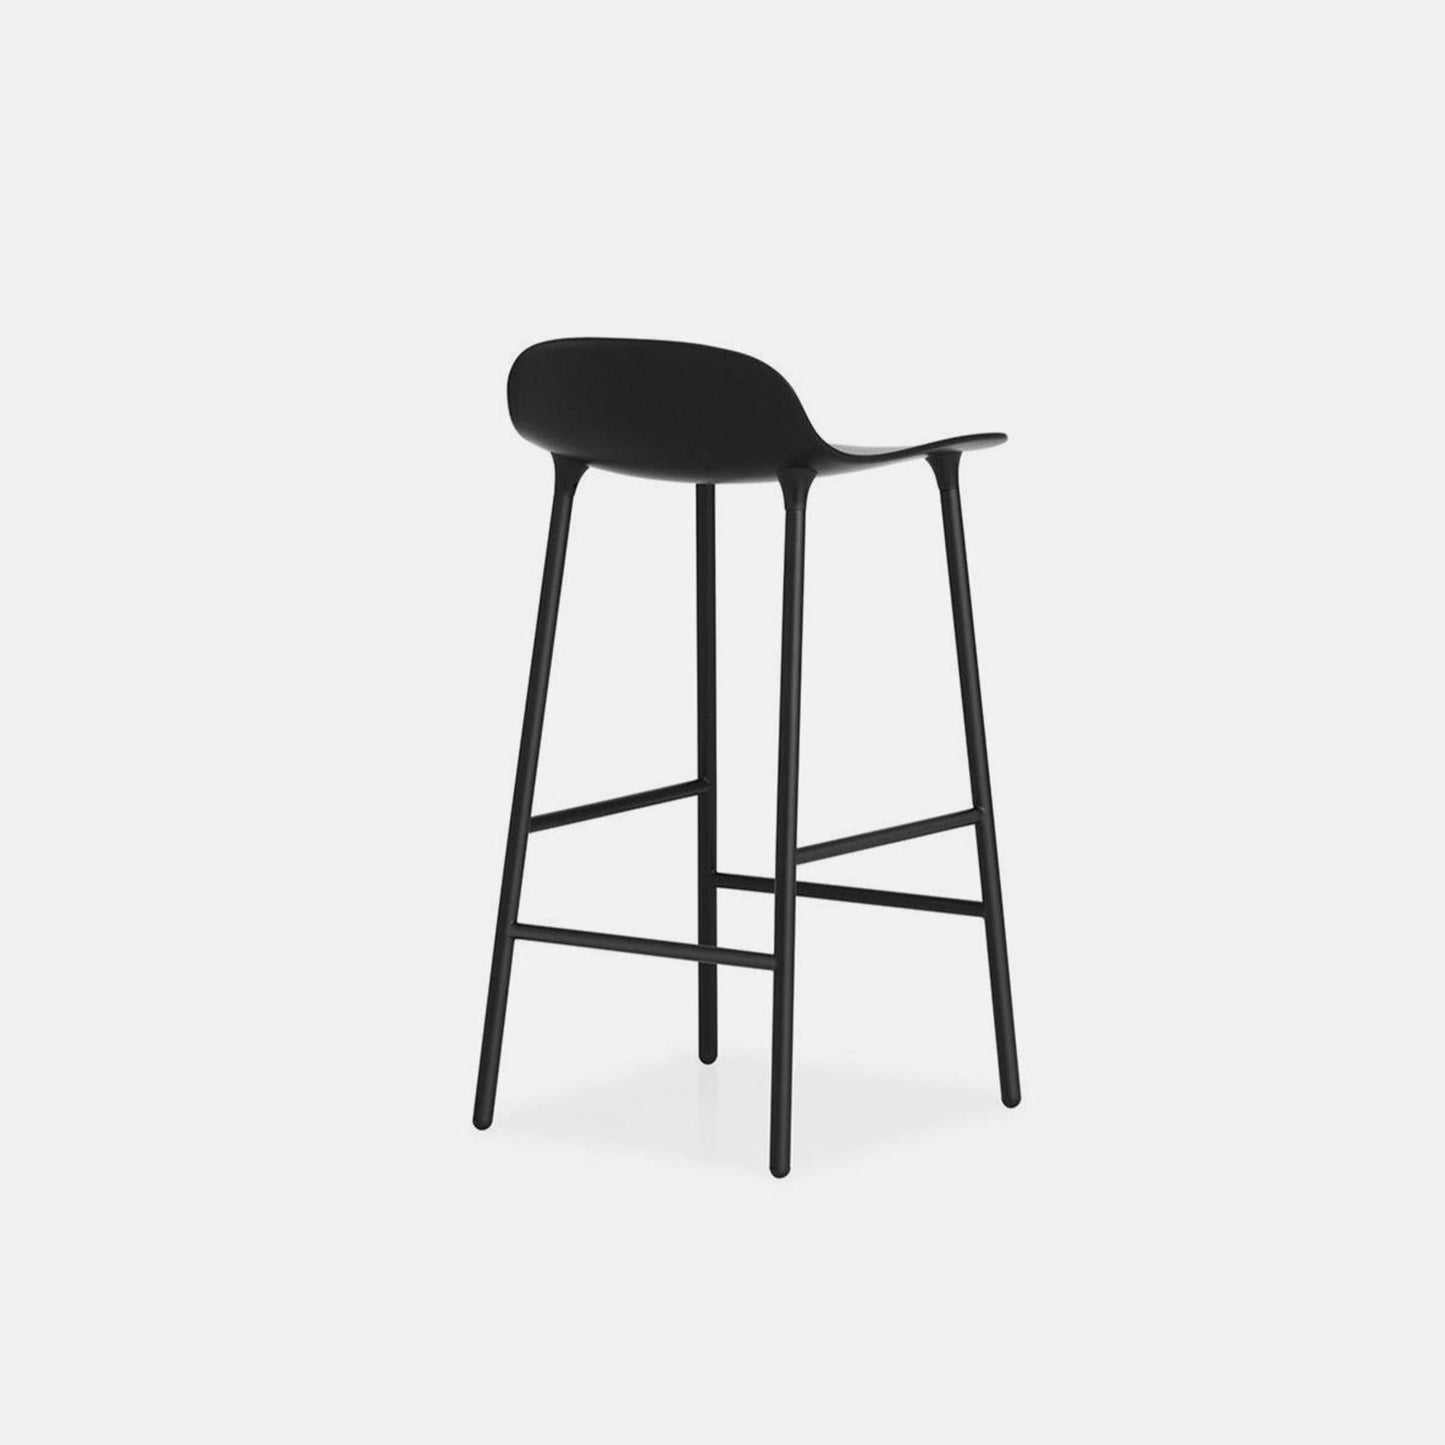 Form stool - Steel and Poly